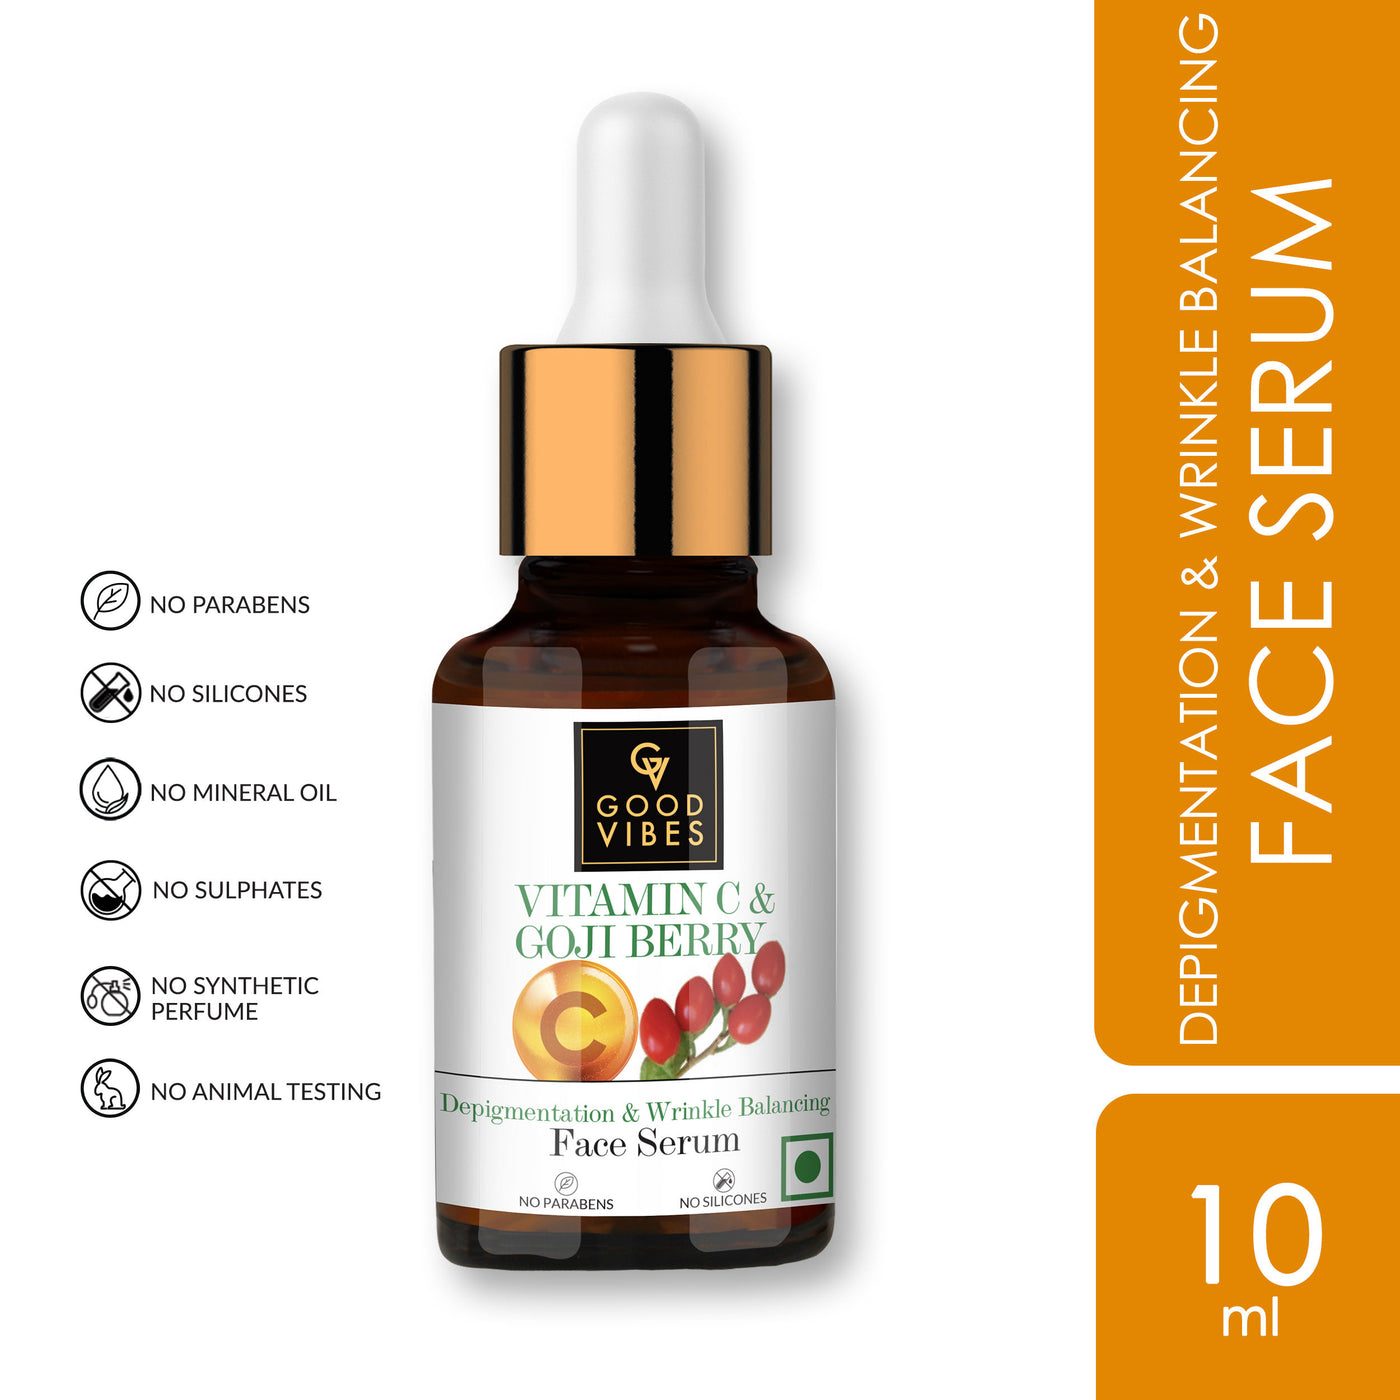 good-vibes-vitamin-c-and-goji-berry-depigmentation-and-wrinkle-balancing-face-serum-10-ml-2